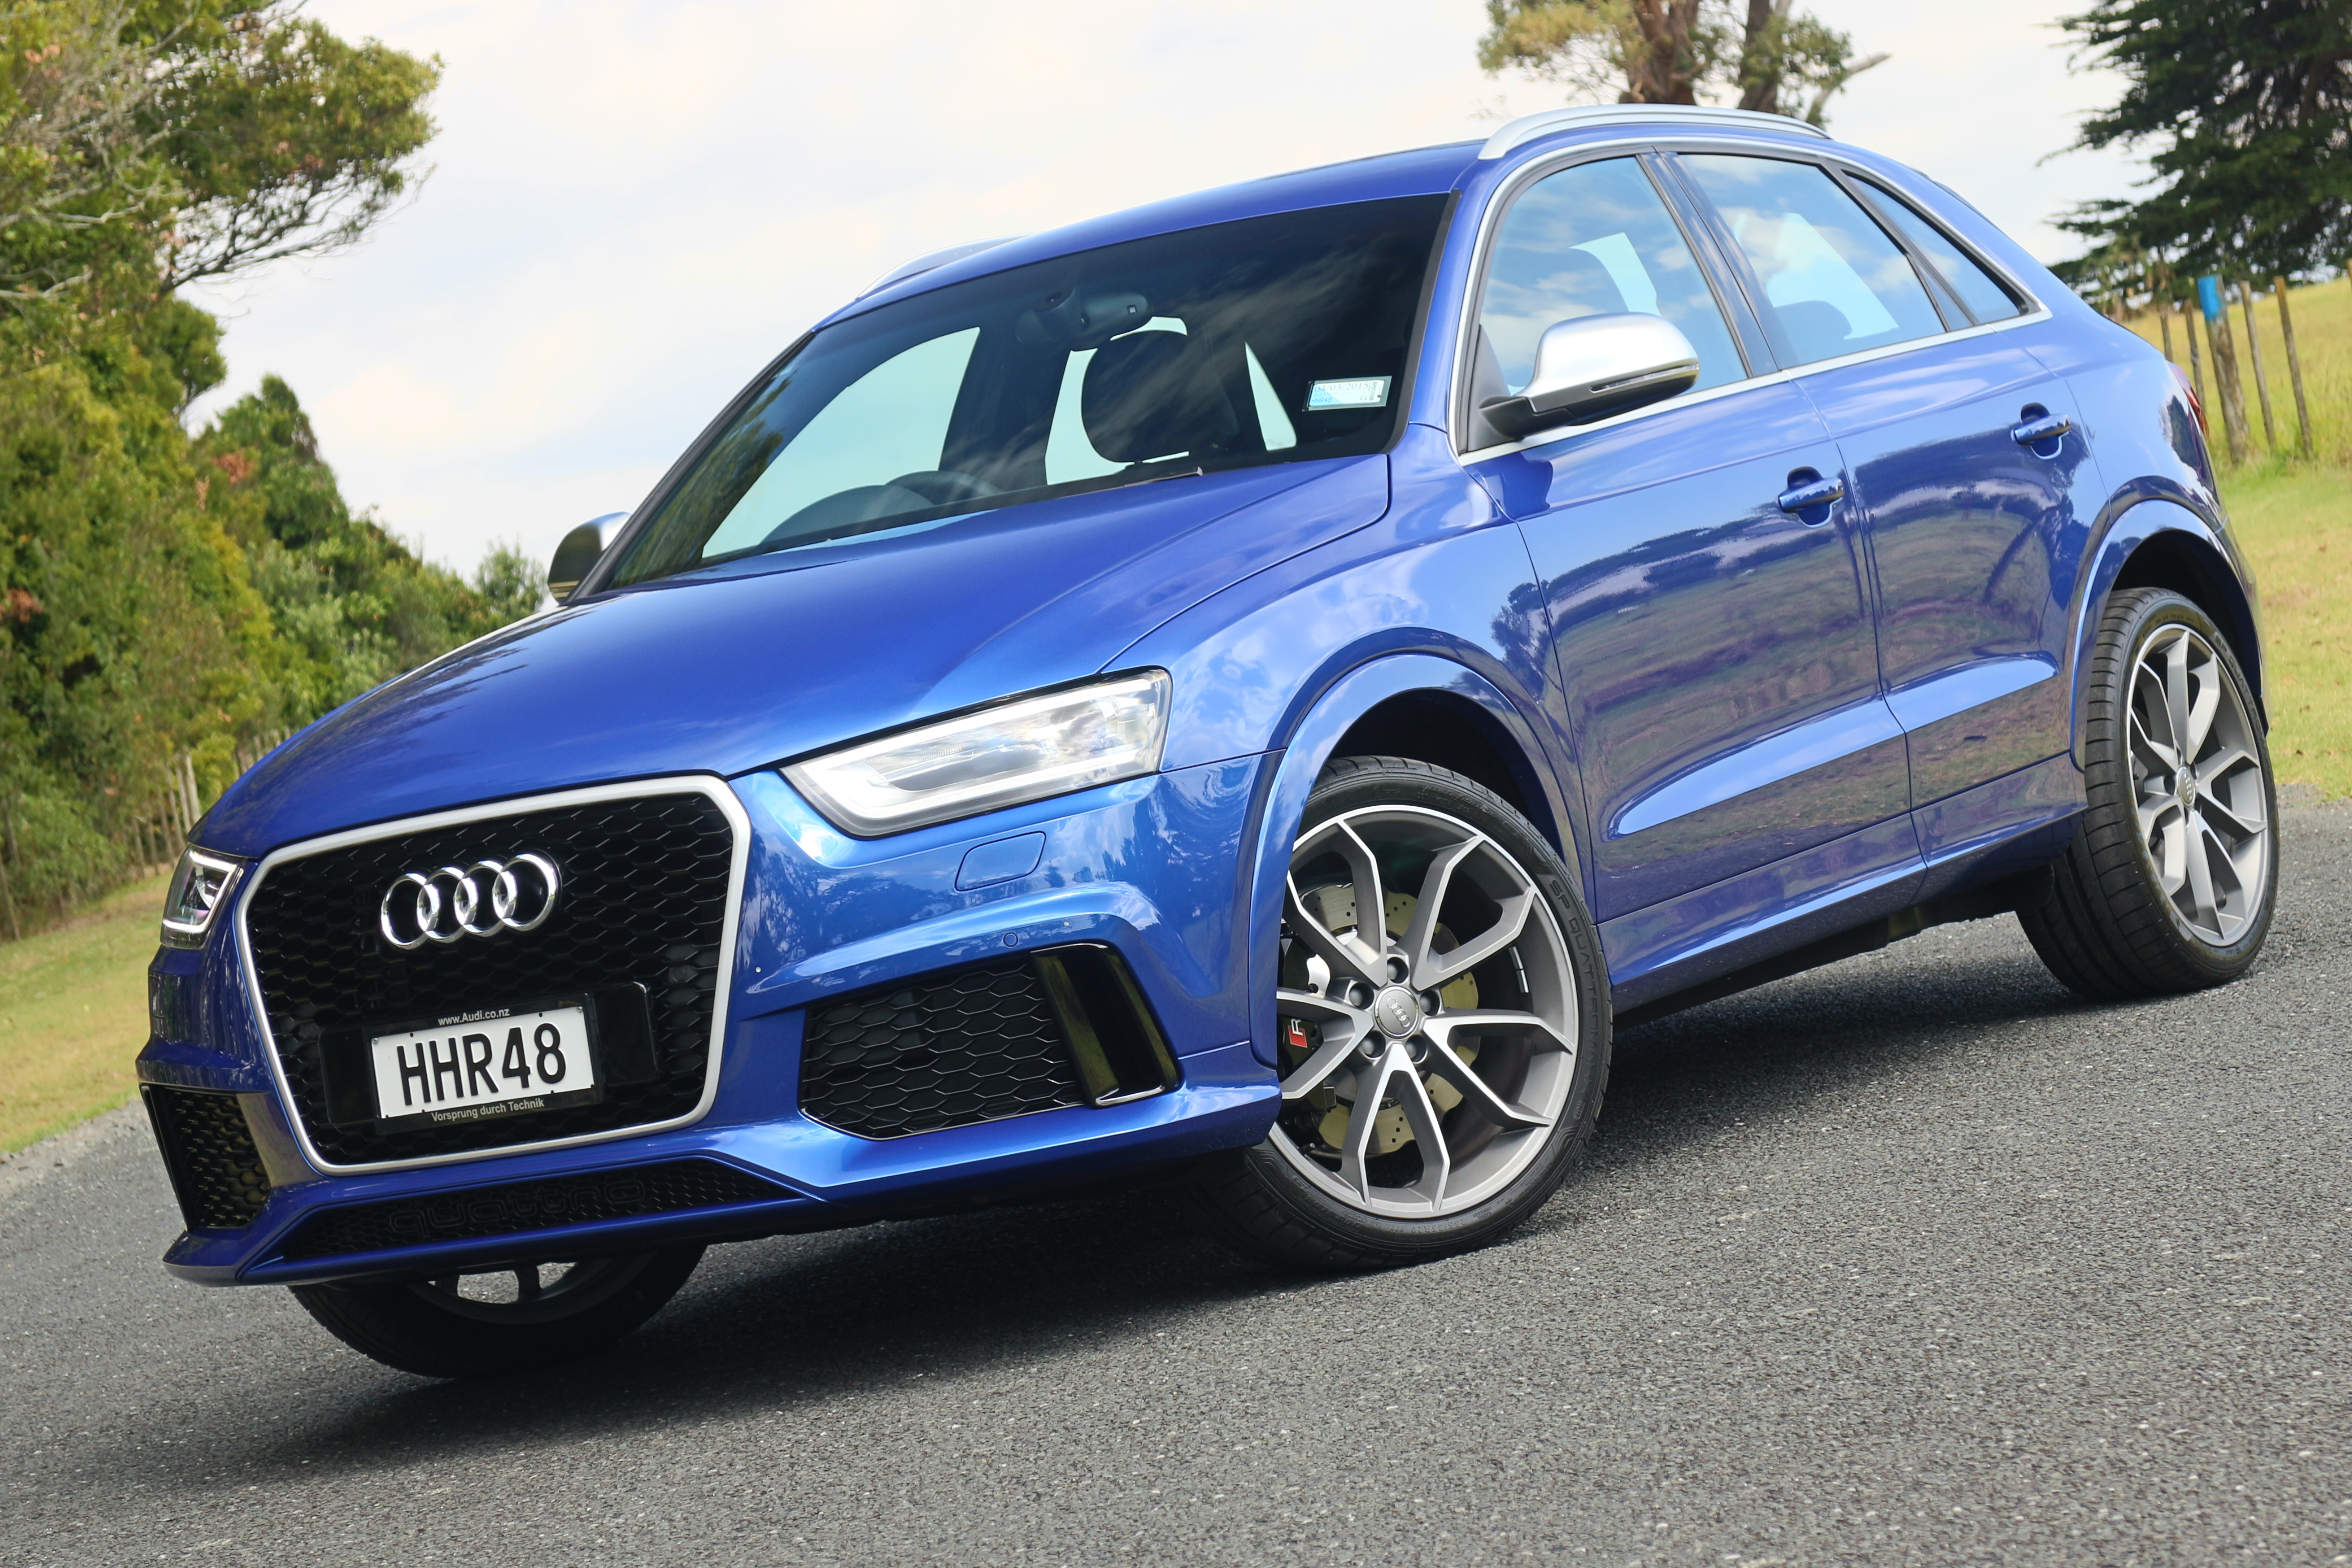 Audi RS Q3: Baby SUV gets go-fast treatment - NZ Herald